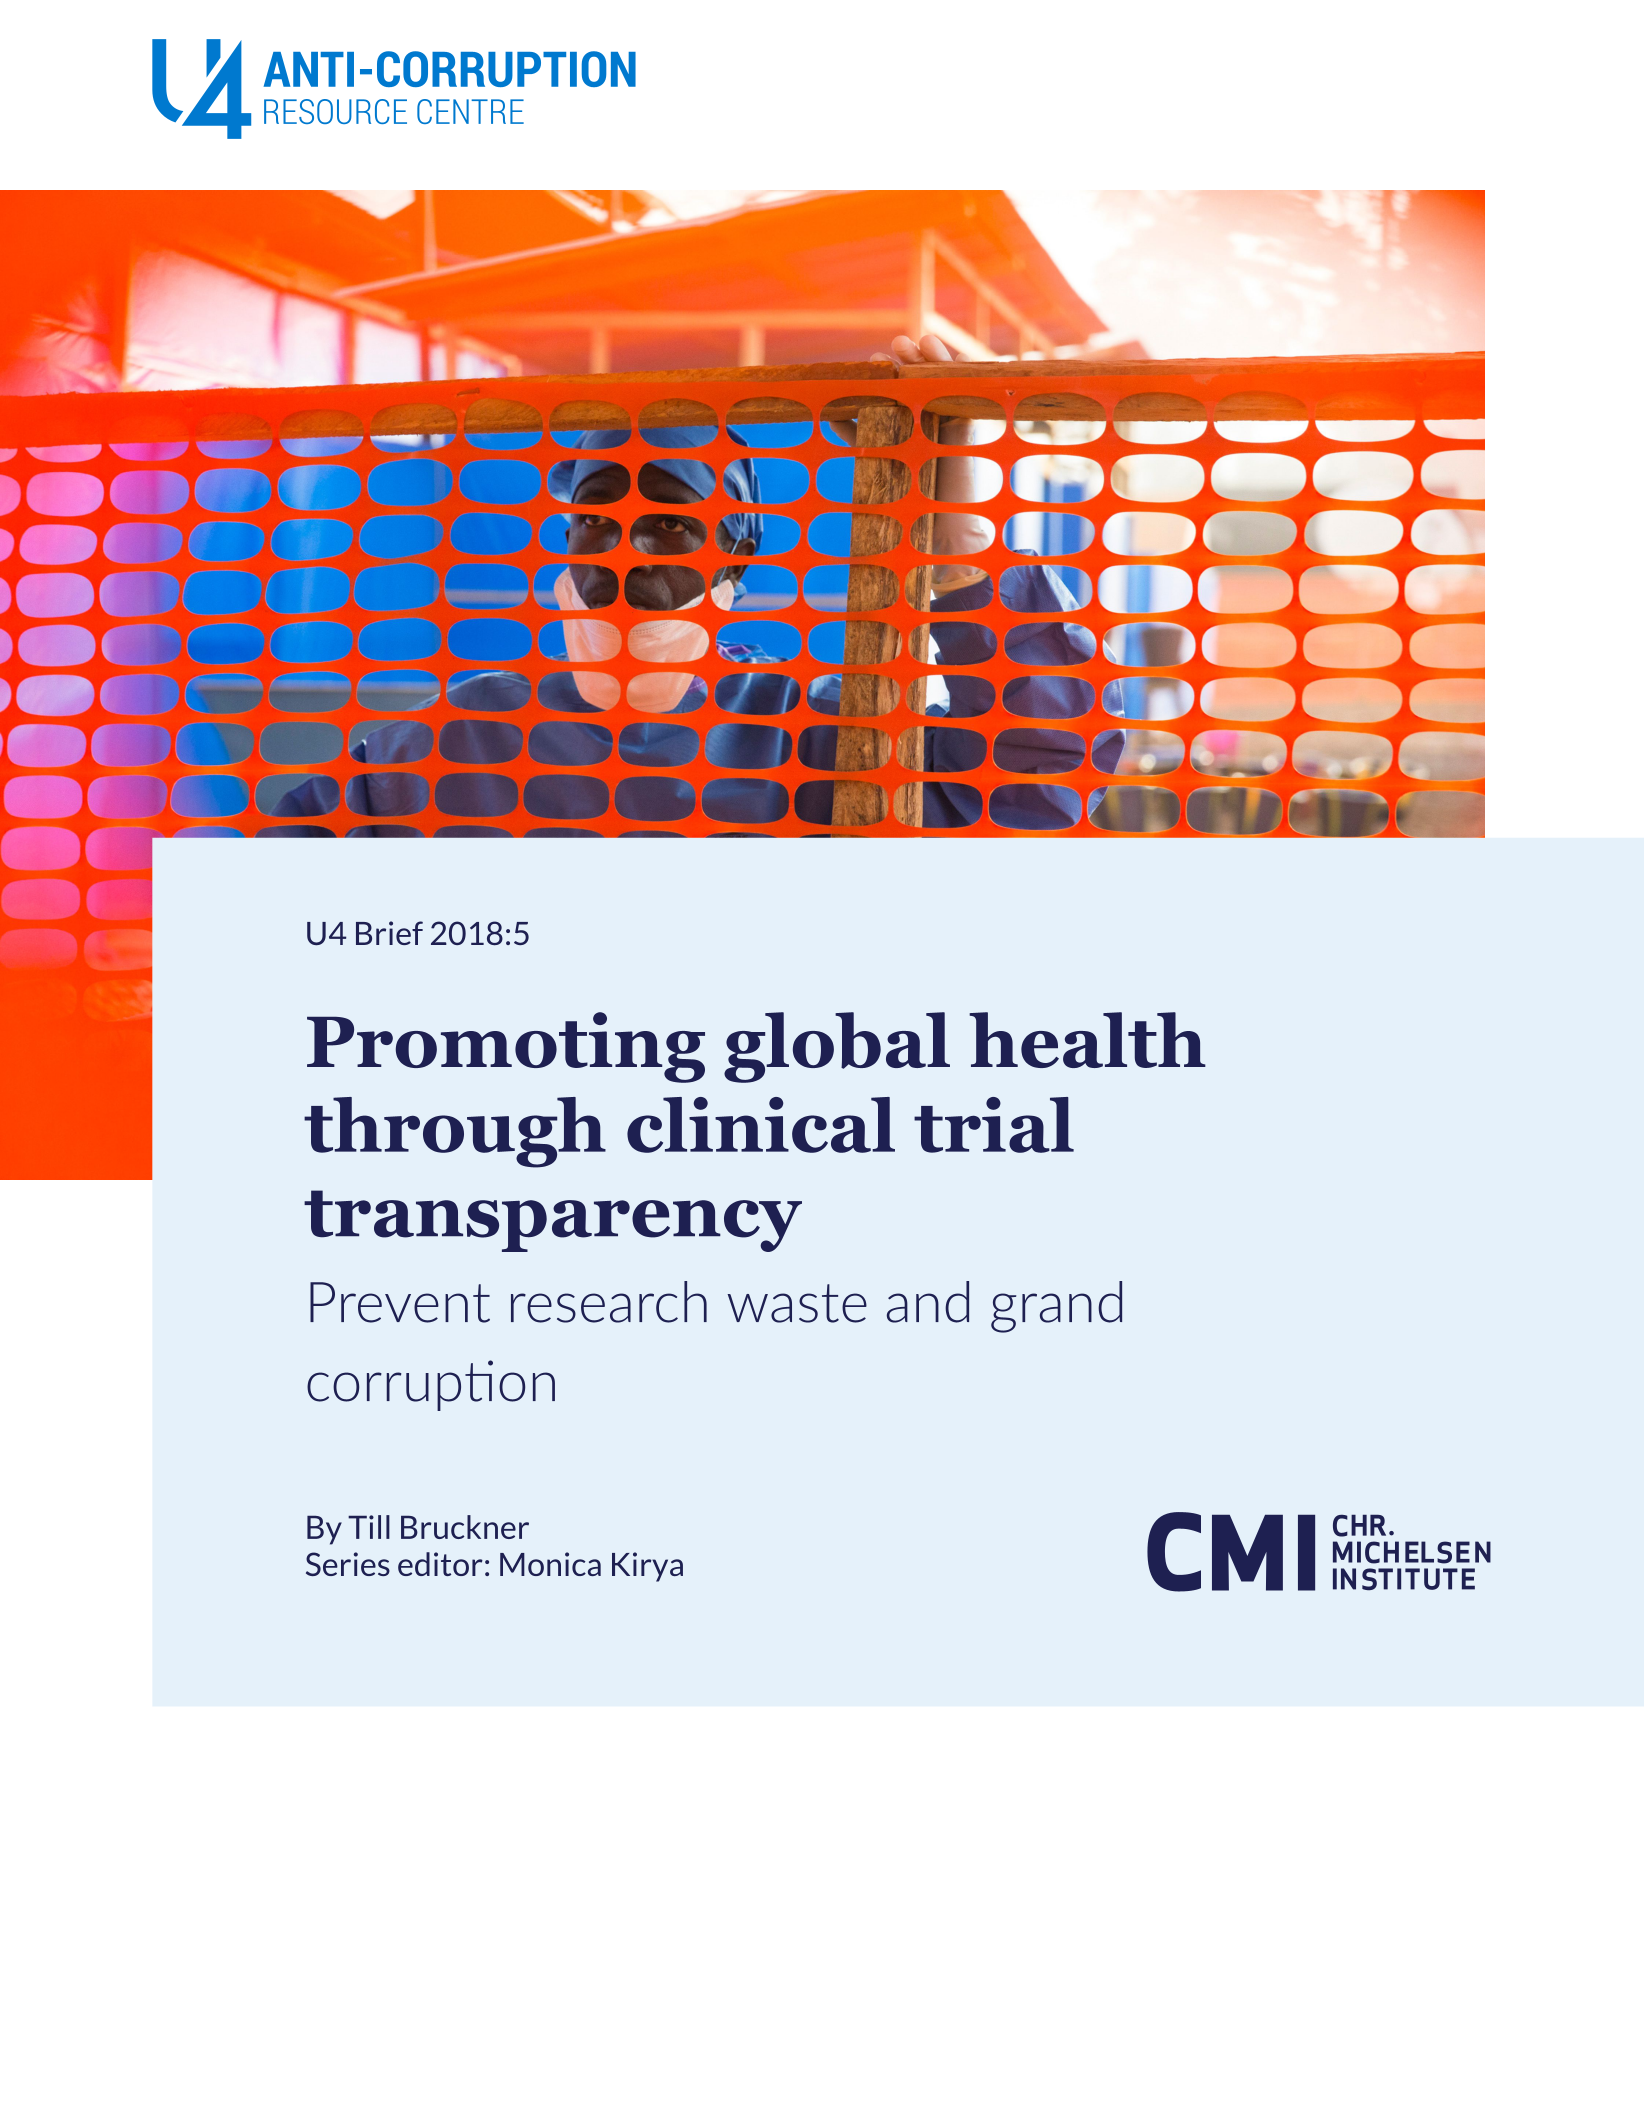 Promoting global health through clinical trial transparency